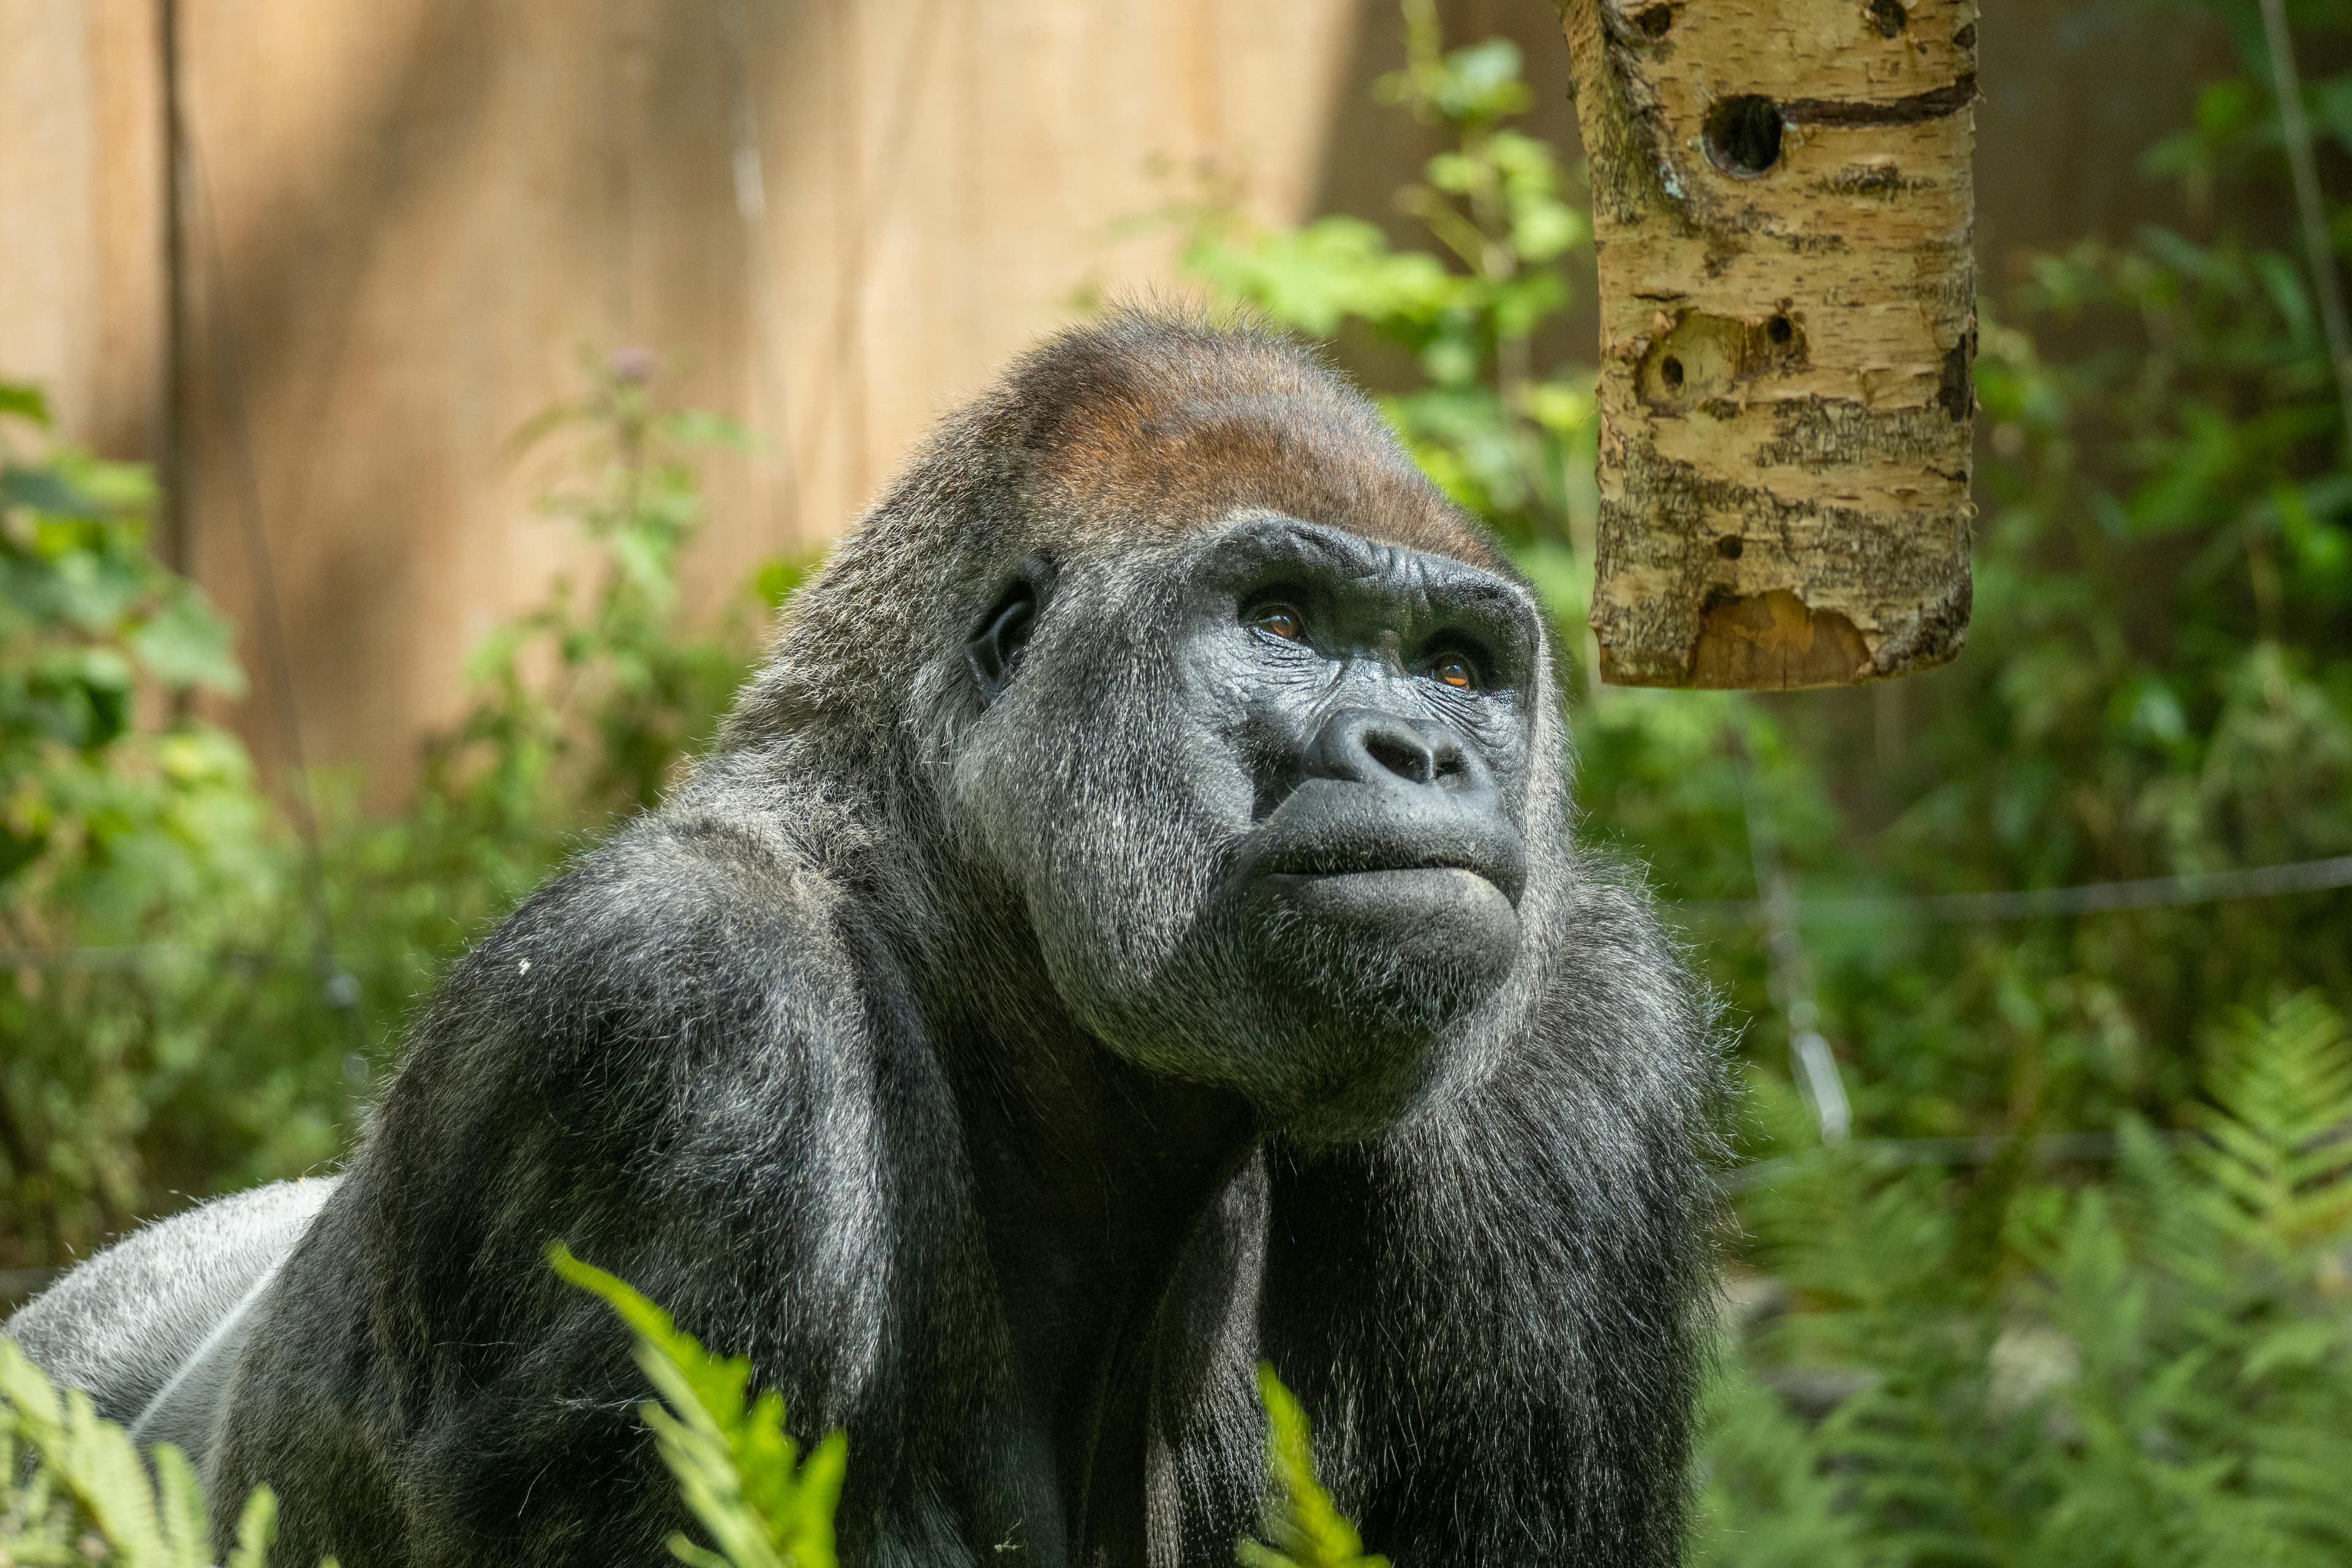 A pensive gorilla gazes into the distance, surrounded by lush greenery.